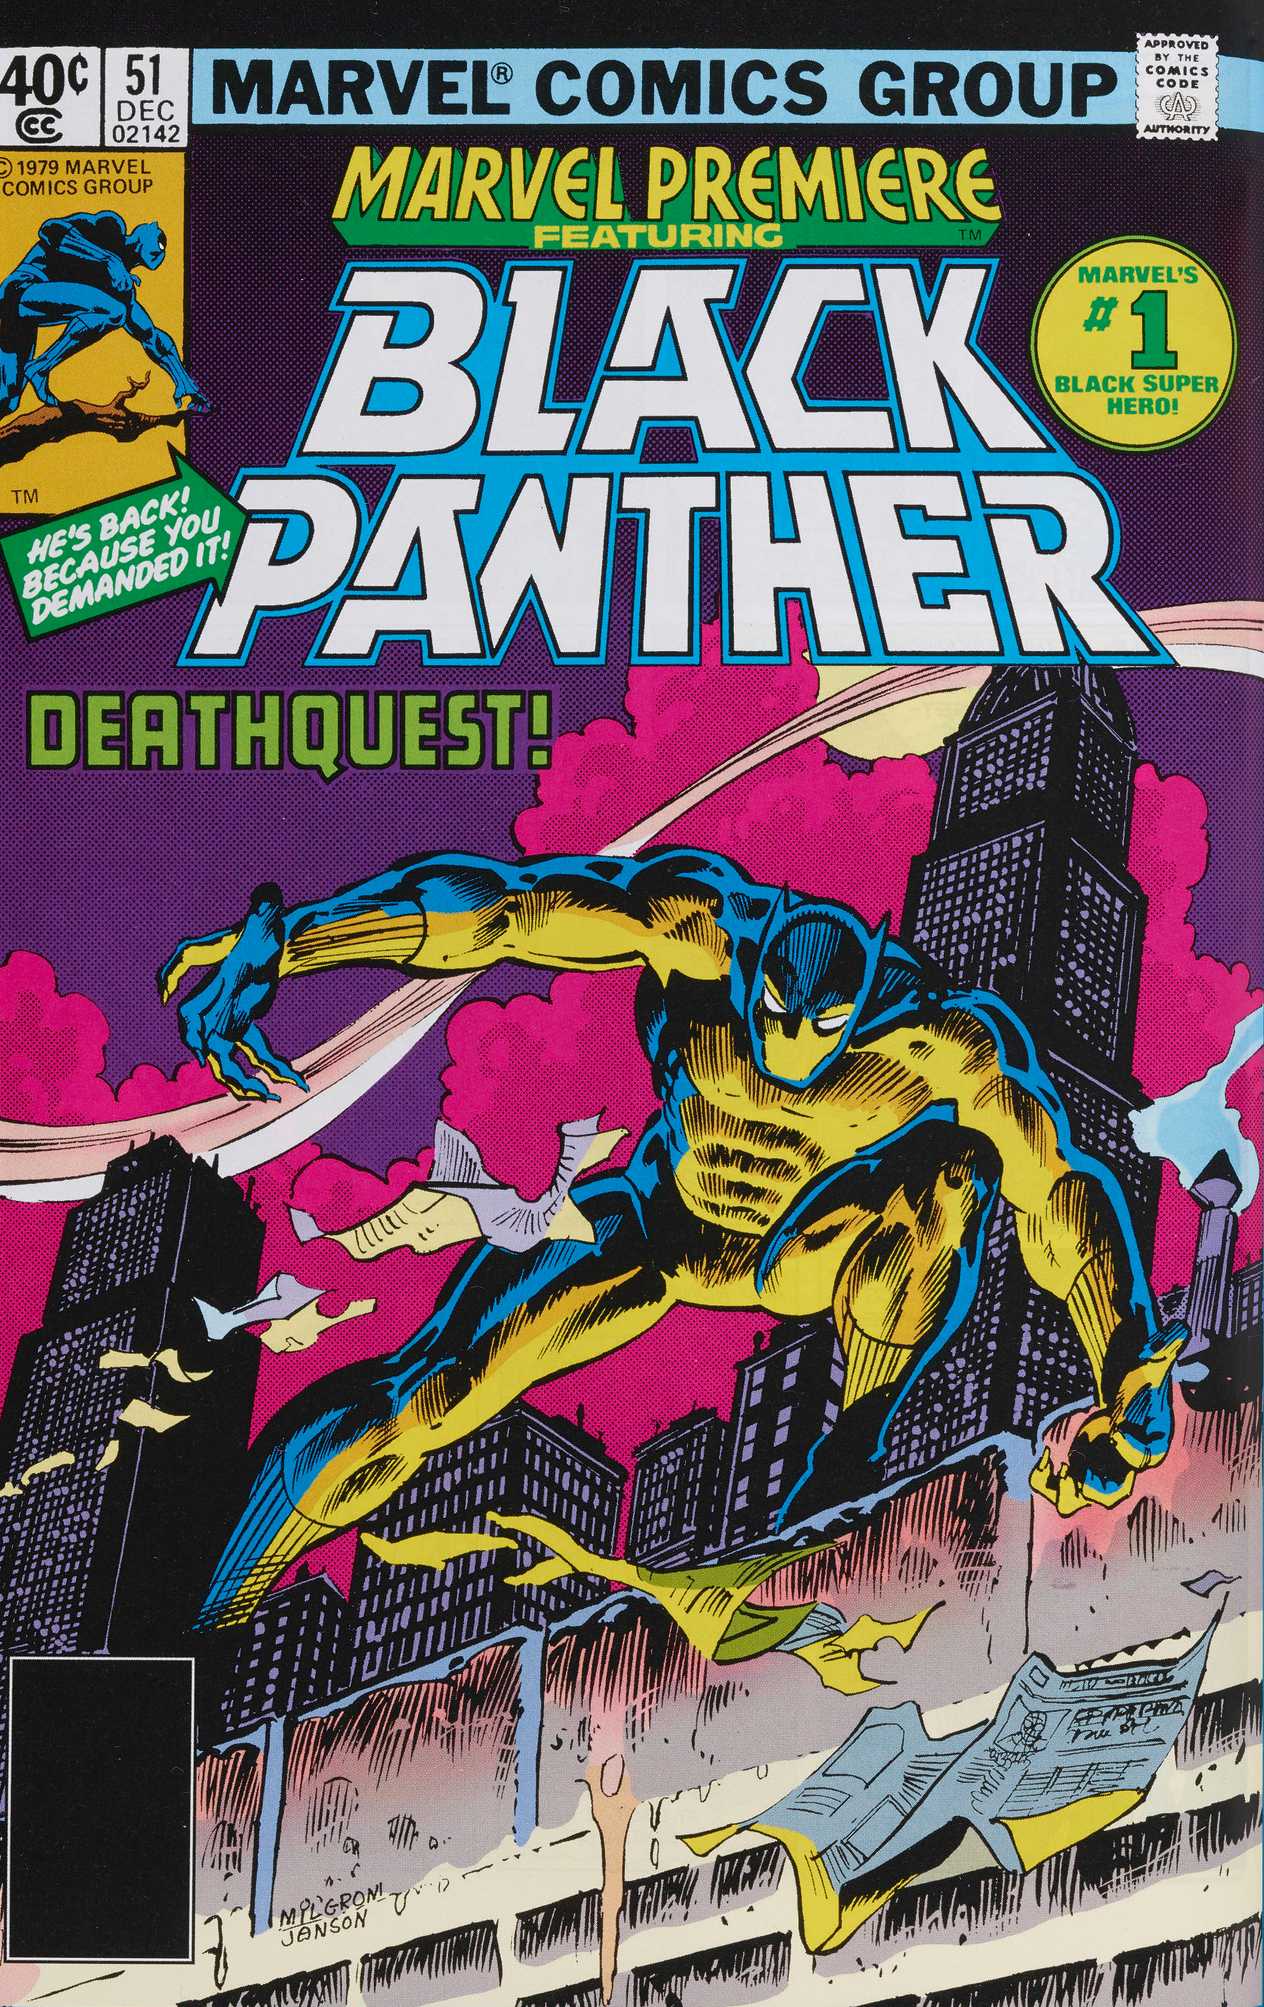 The cover of Black panther leans forward in a powerful action pose against a striking cosmic cityscape.